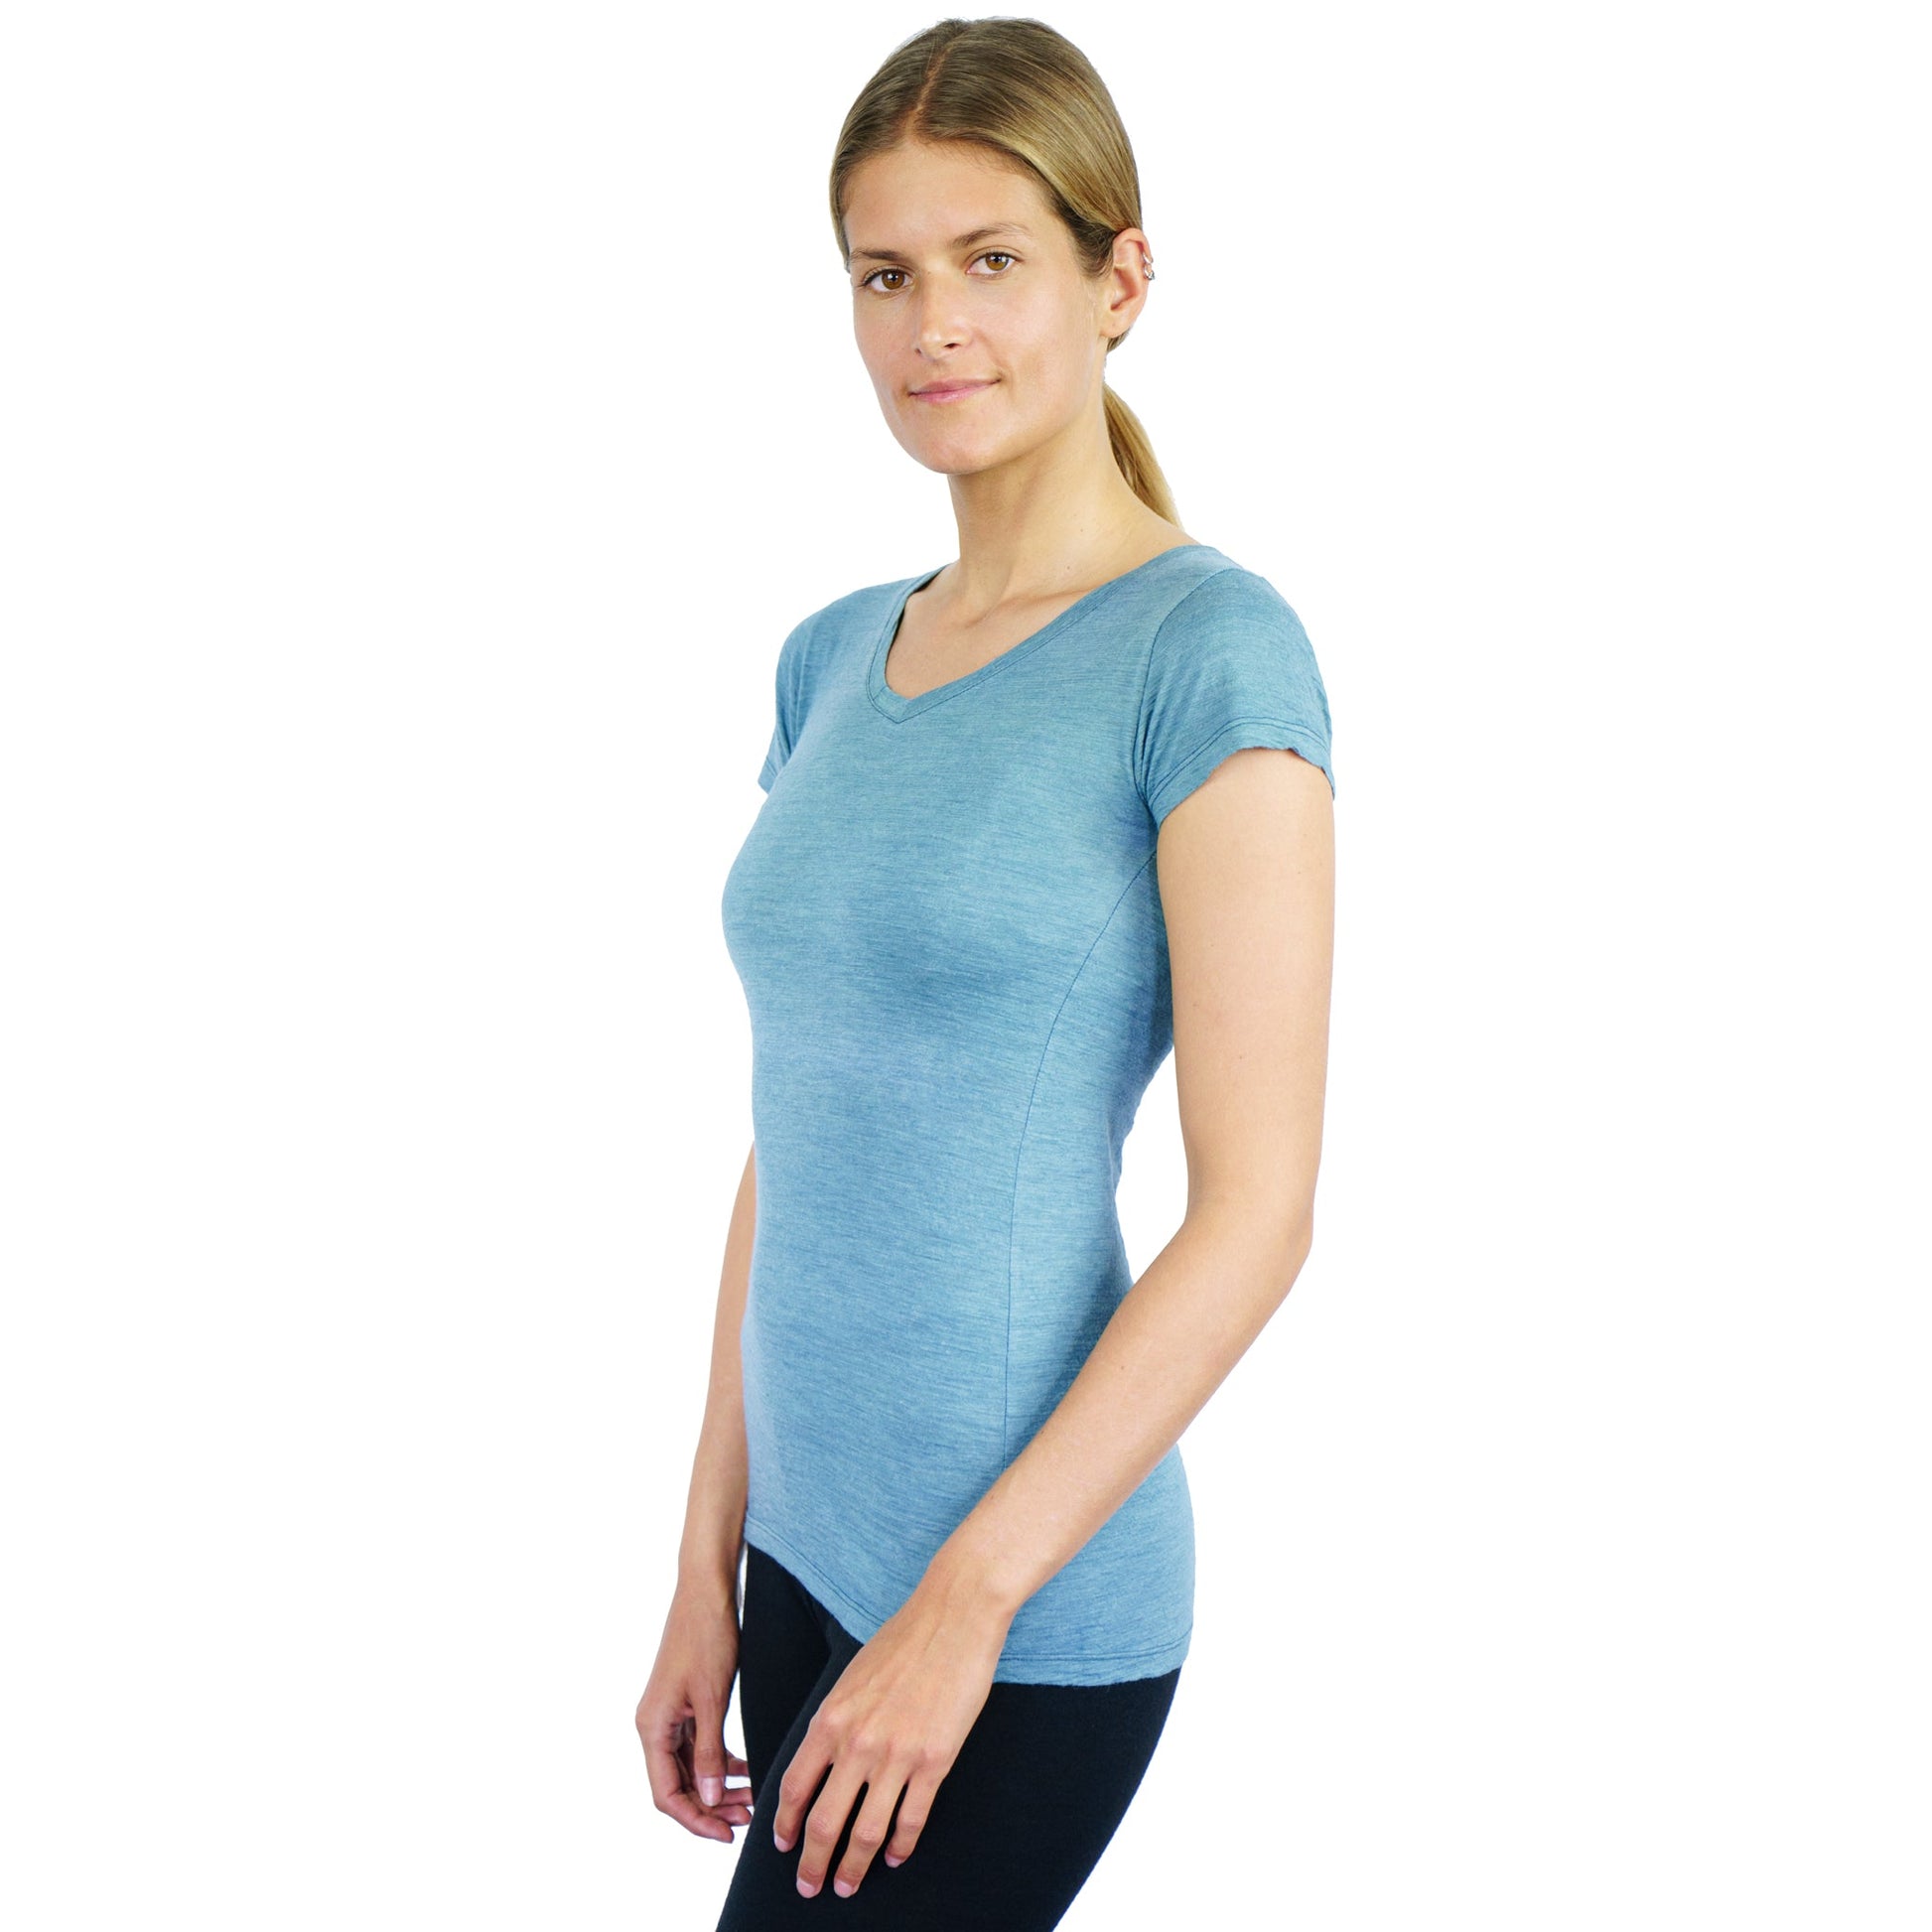 Women's Alpaca Wool Shirt: 160 Ultralight V-Neck color Natural Turquoise